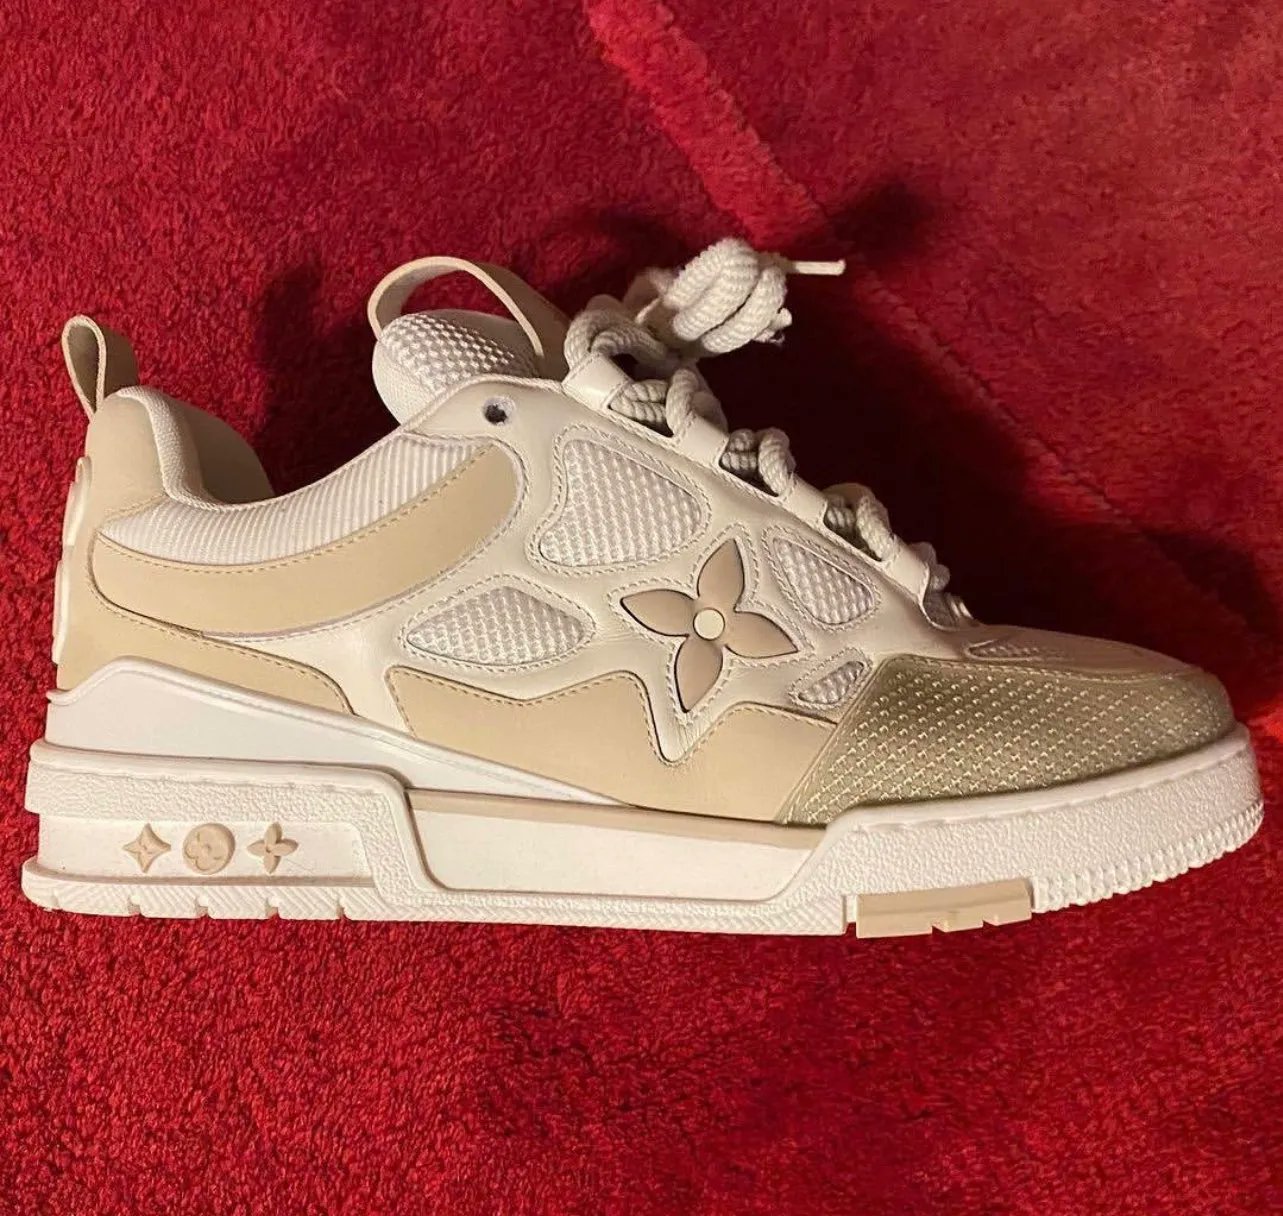 Abloh's Run of Skate-inspired Silhouettes  The Louis Vuitton LV SK8 Low  Review 